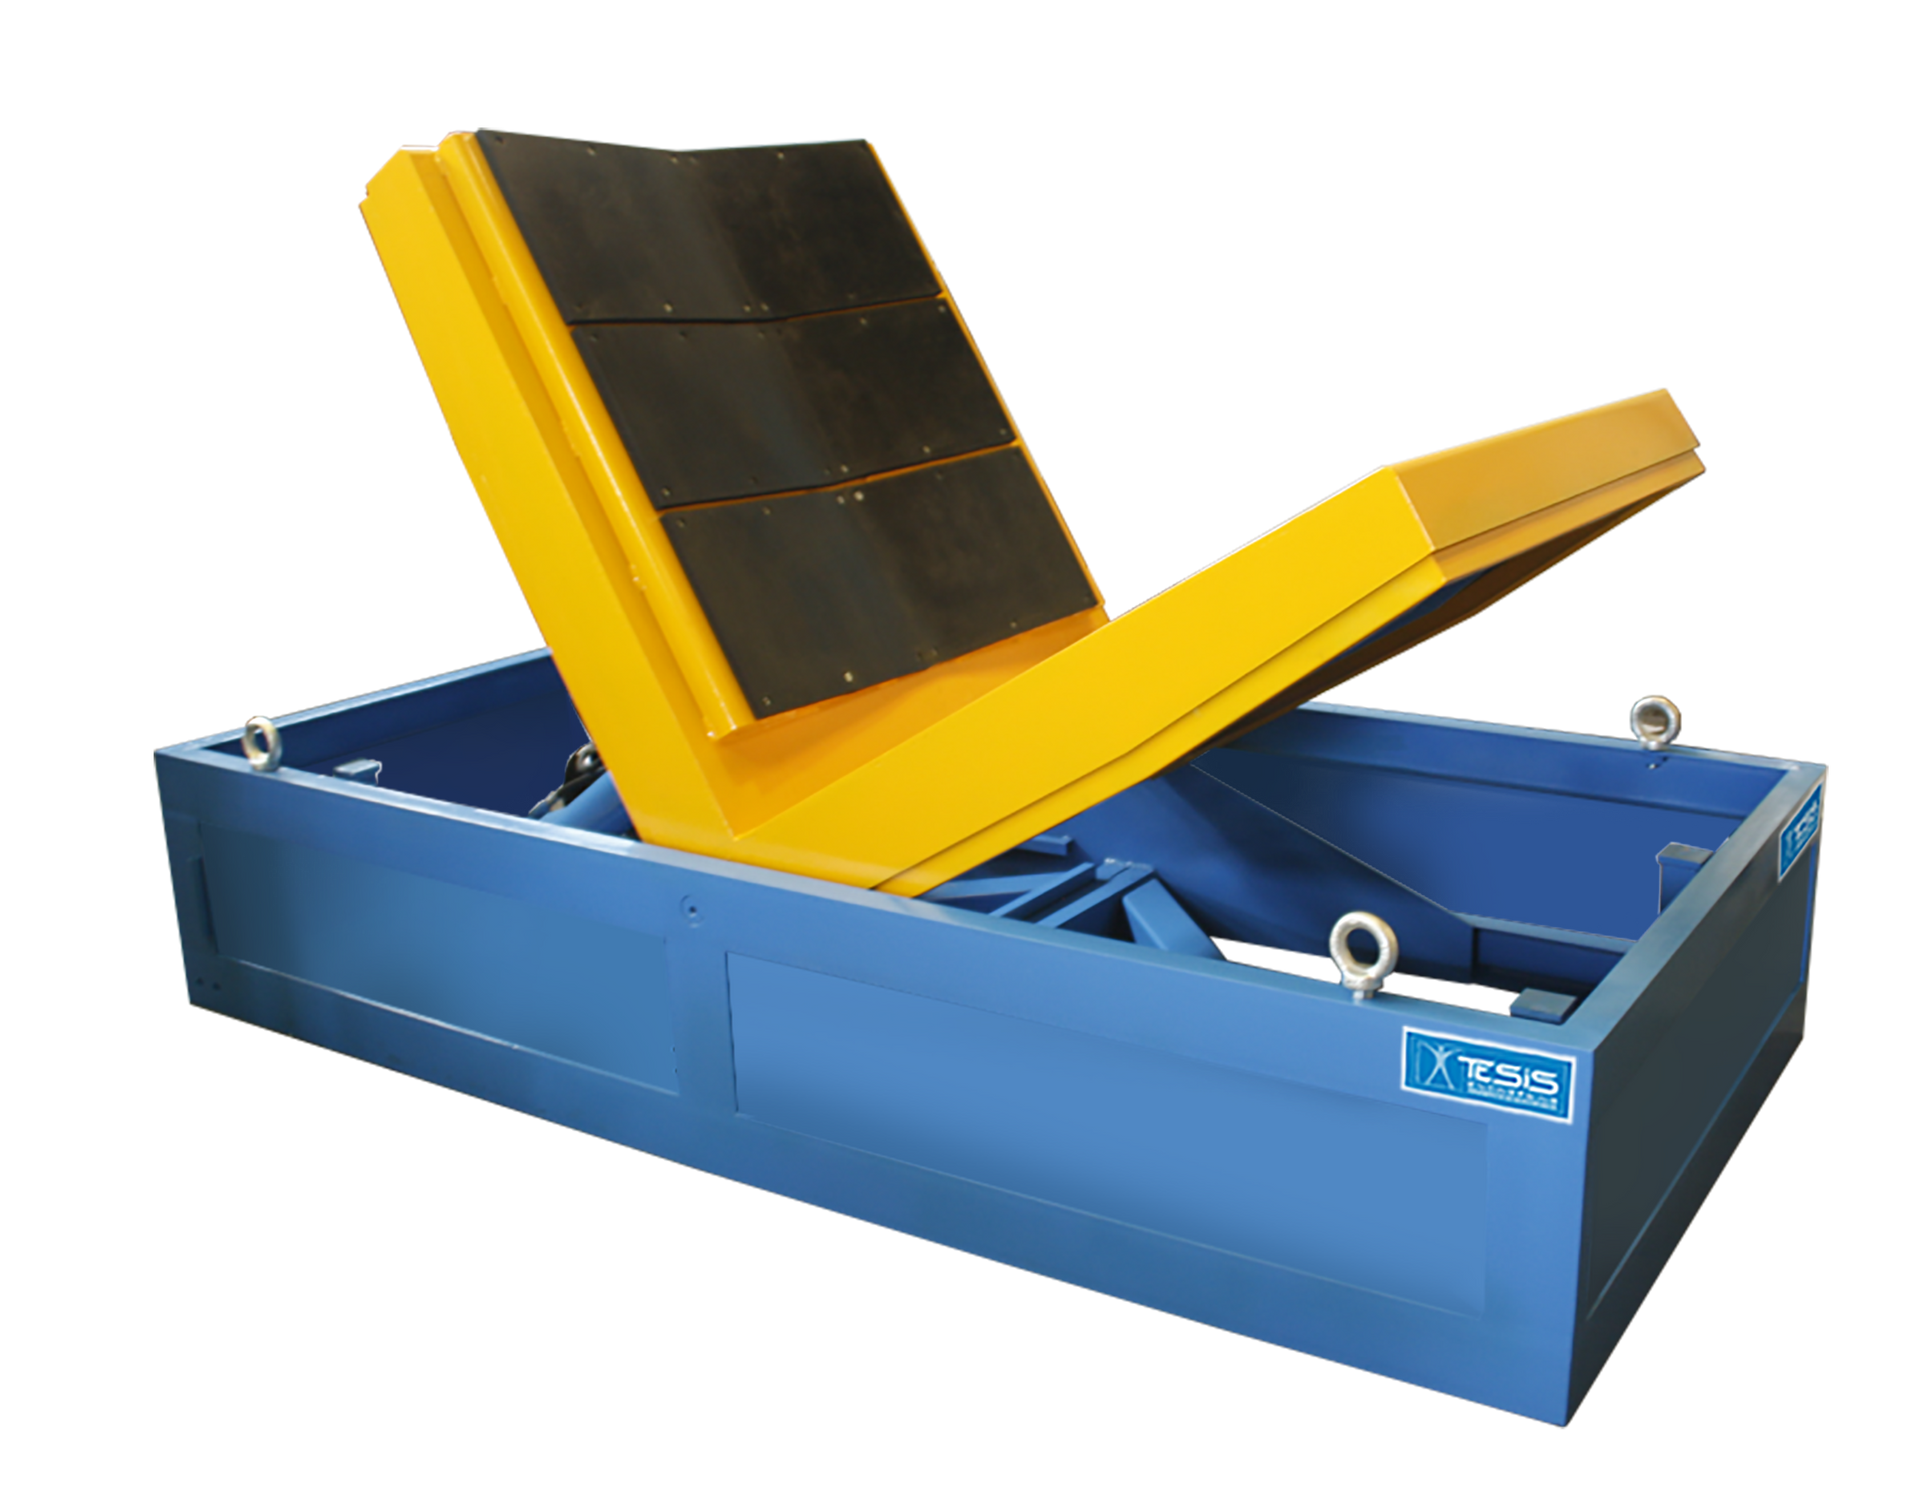 90° tilter with cradle-shaped surface for palletizing coils and reels, hydraulic palletizer tilter for coils, coil unpender, coil tipper